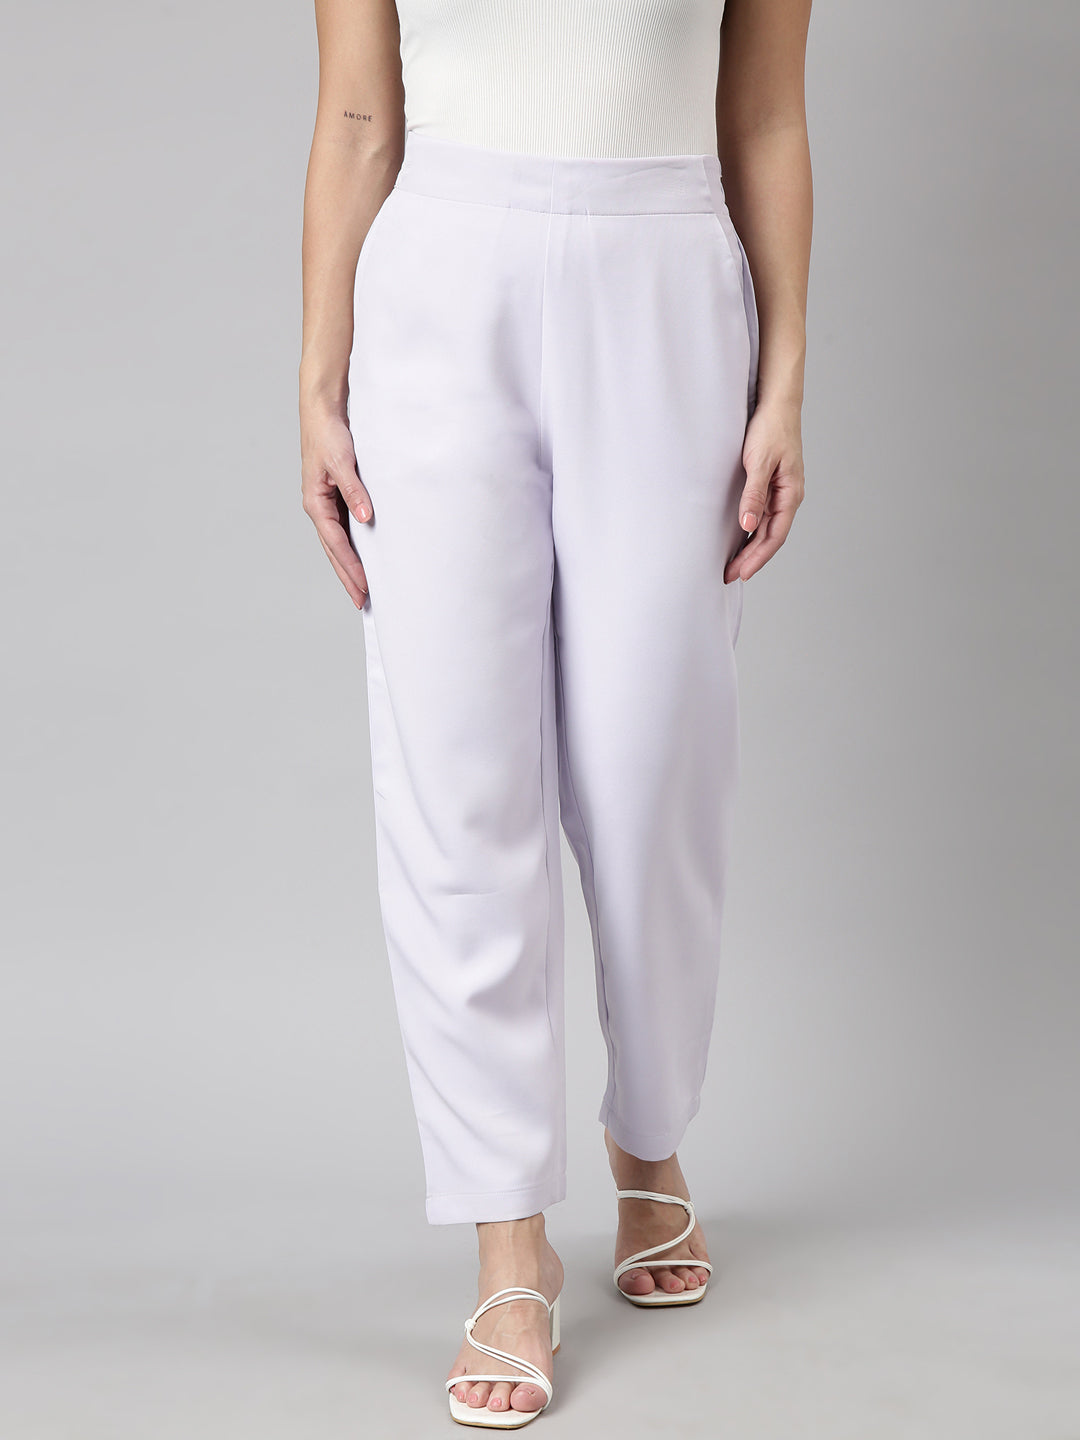 Women Solid Lavender Formal Trousers